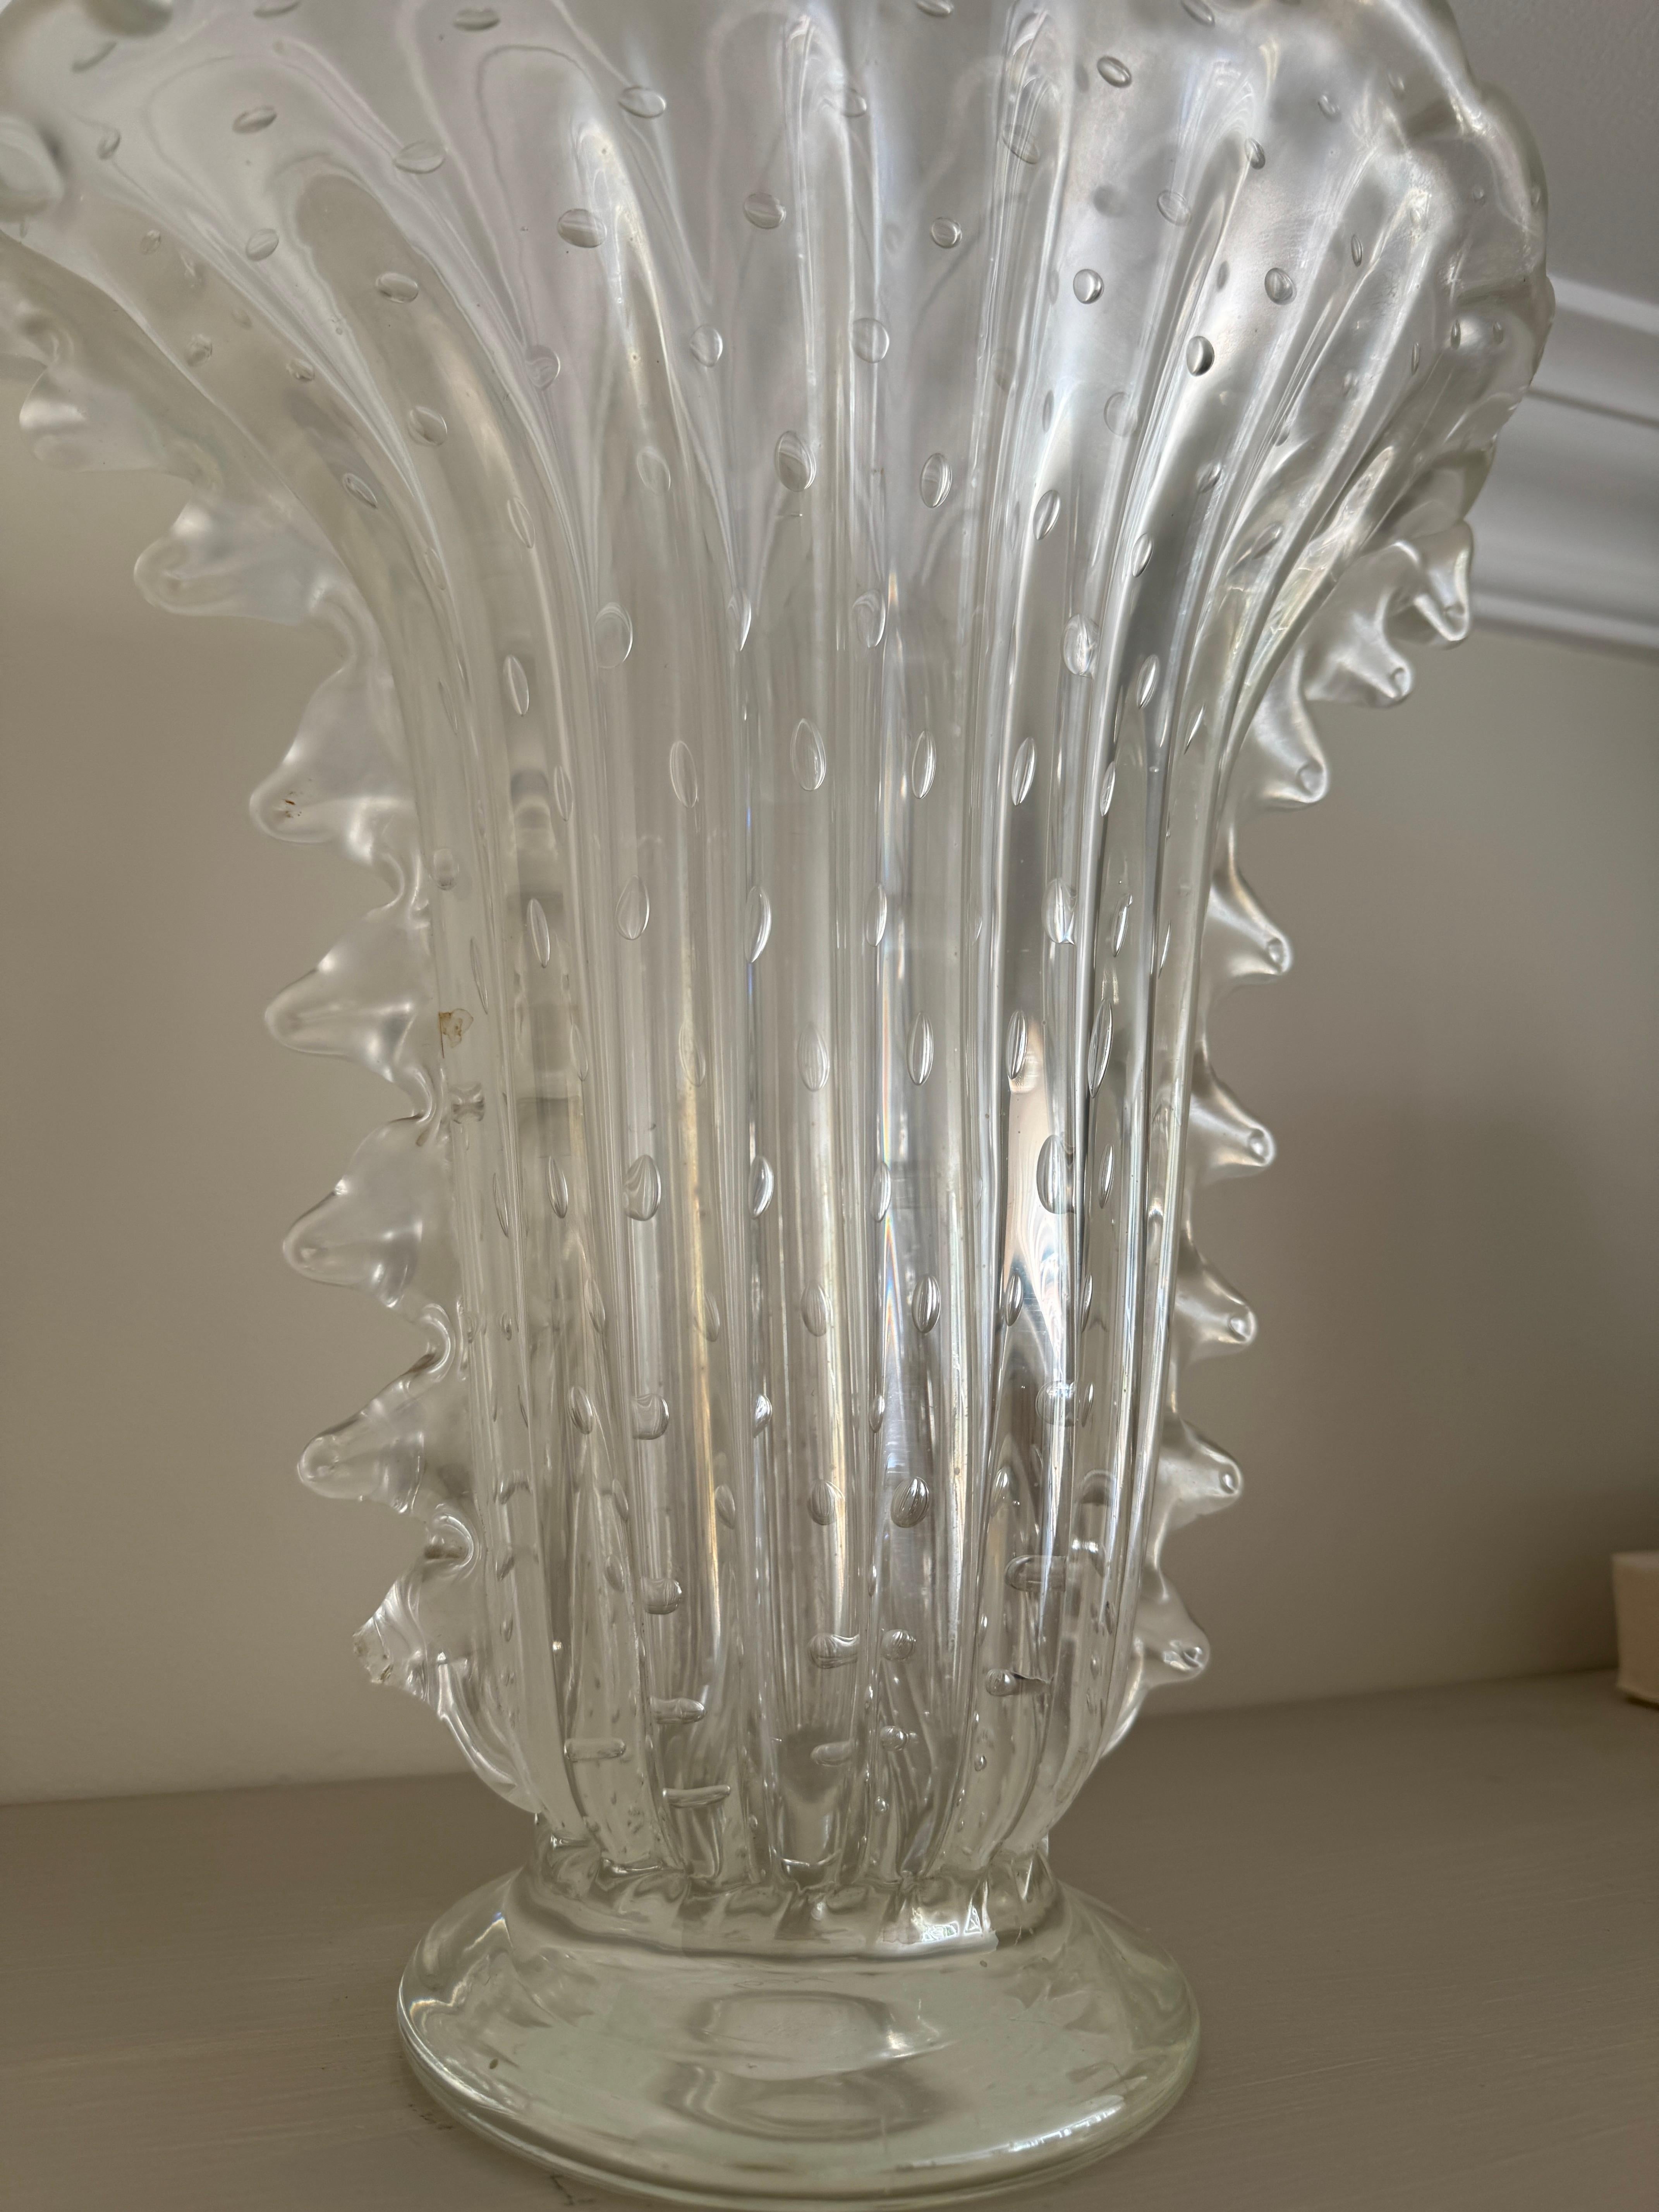 Large Murano Bullicante Vase by Barovier & Toso, c.1940s For Sale 3